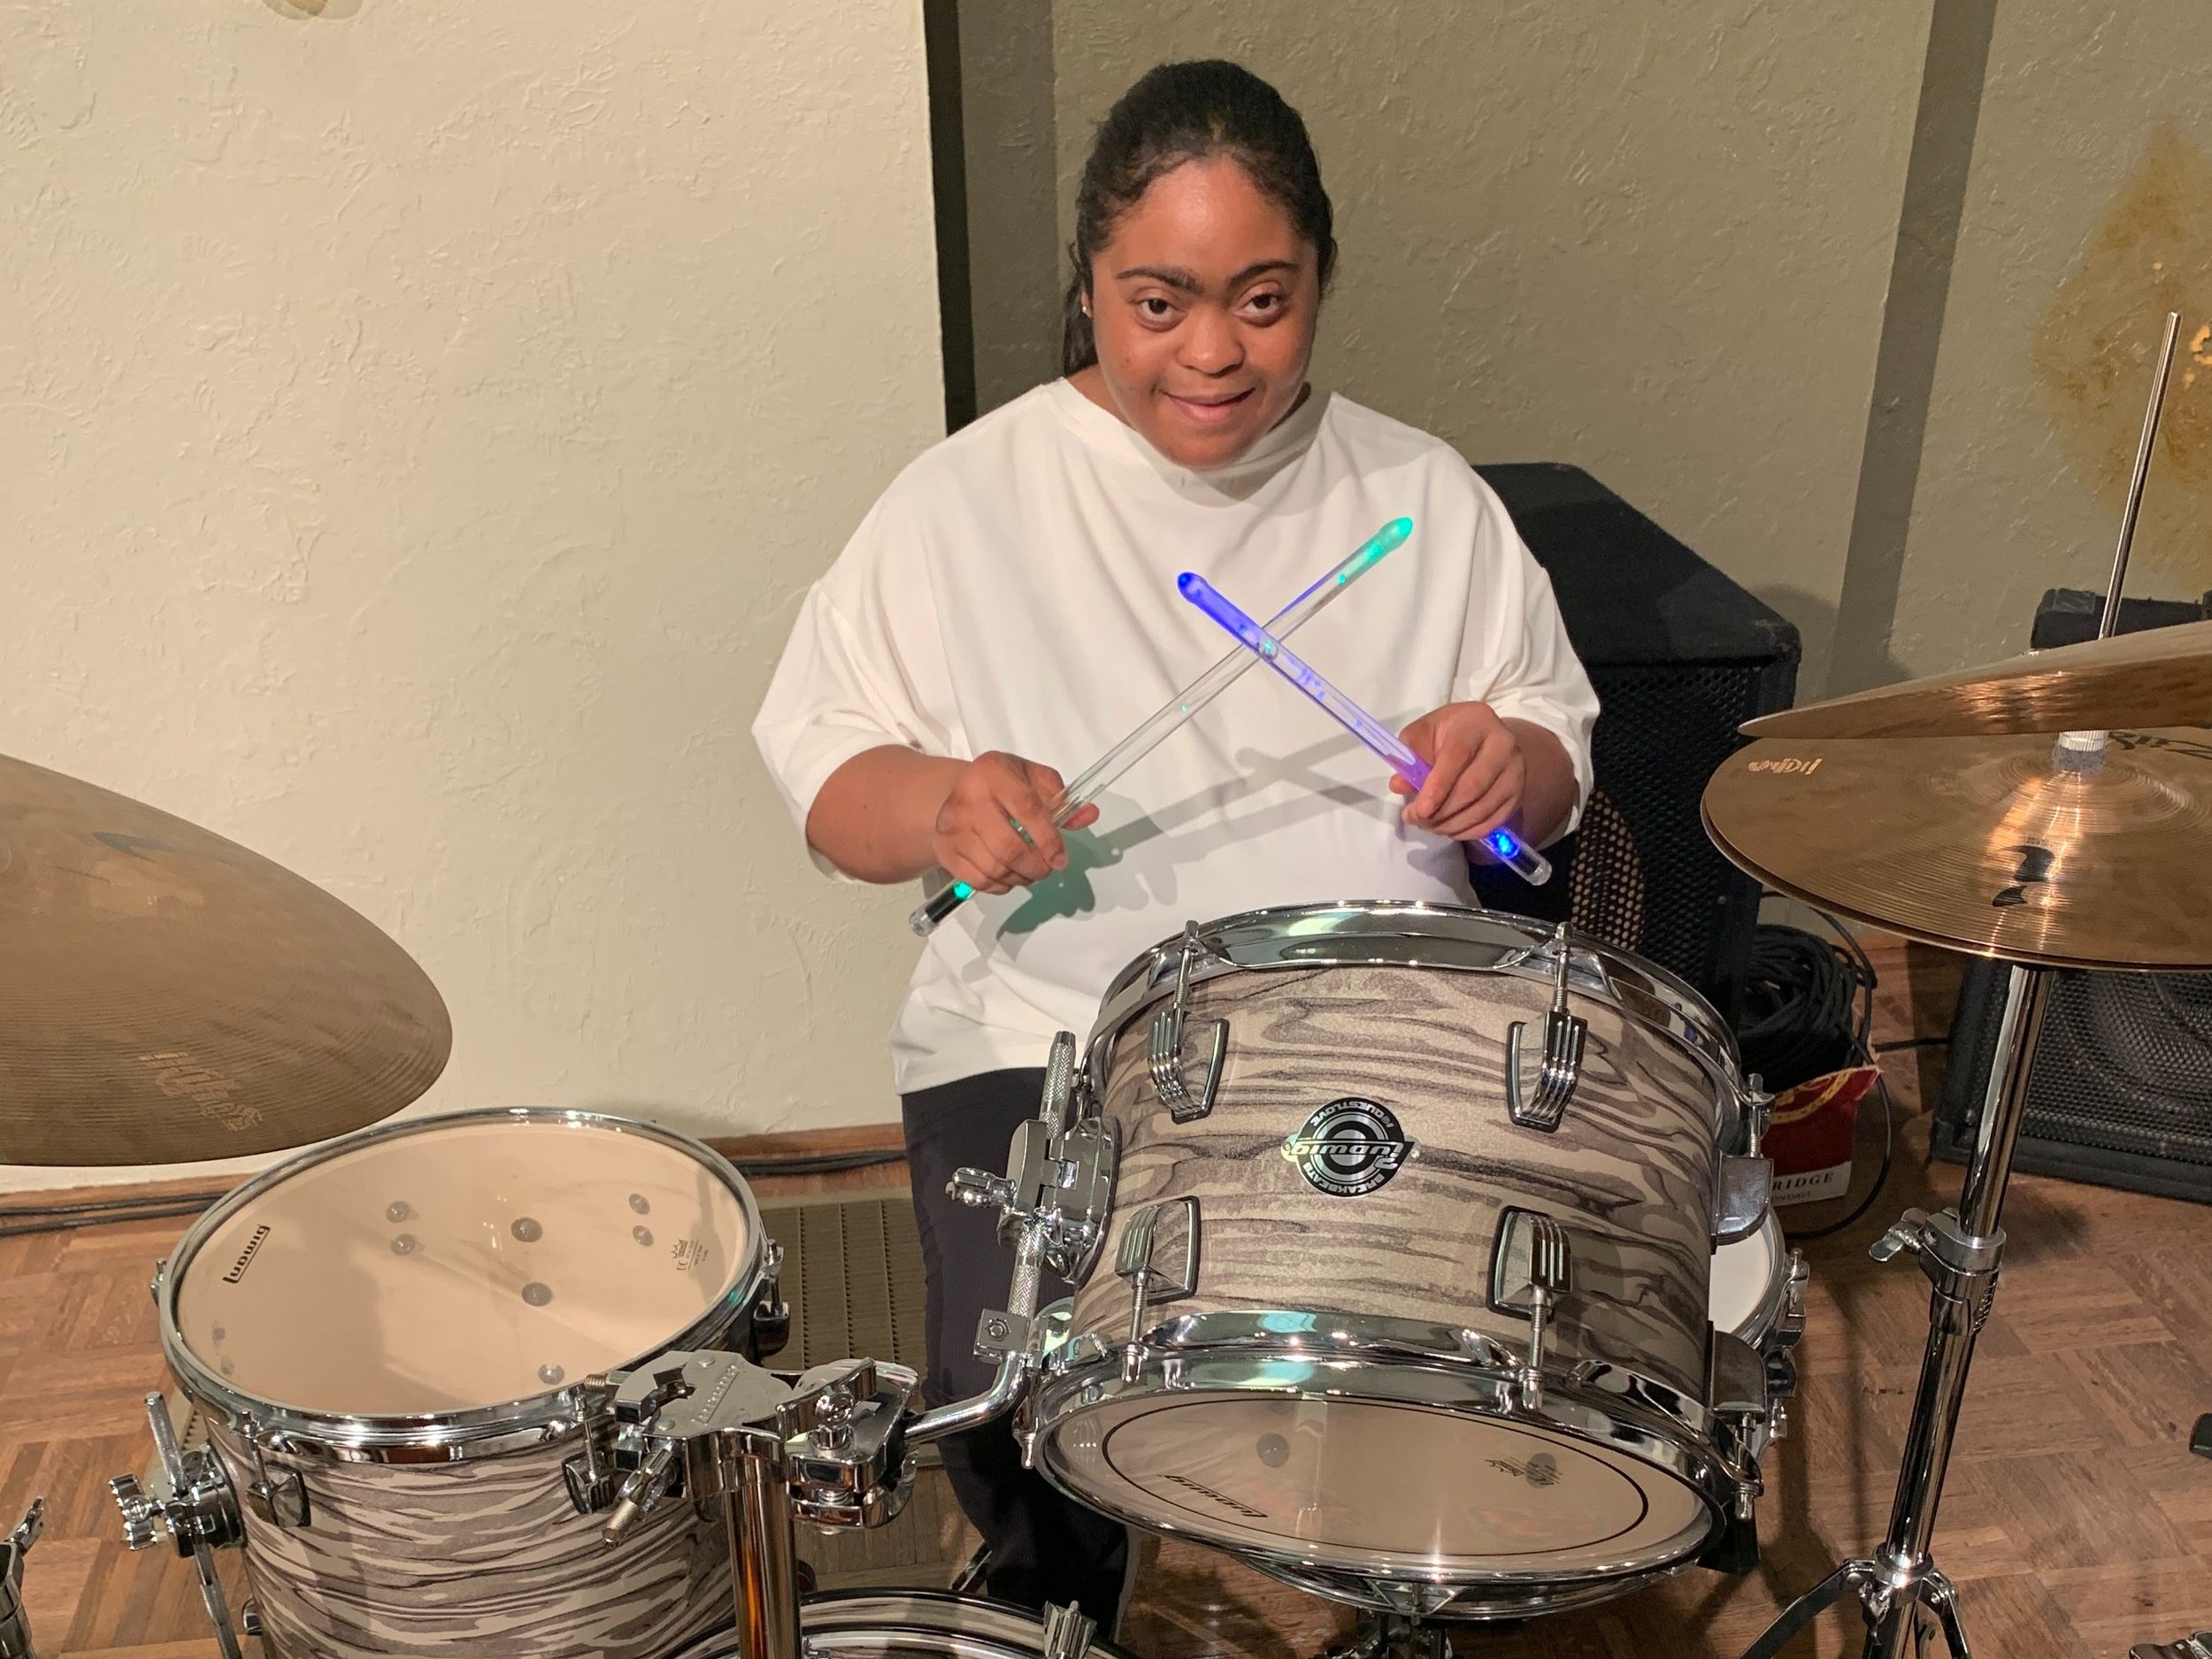  Creative Identity Anaheim participant Ashley smiling with her drum kit at the 2023 Summer Concert and Boutique called the “Coming Together as a Community” to an audience of attendees. 